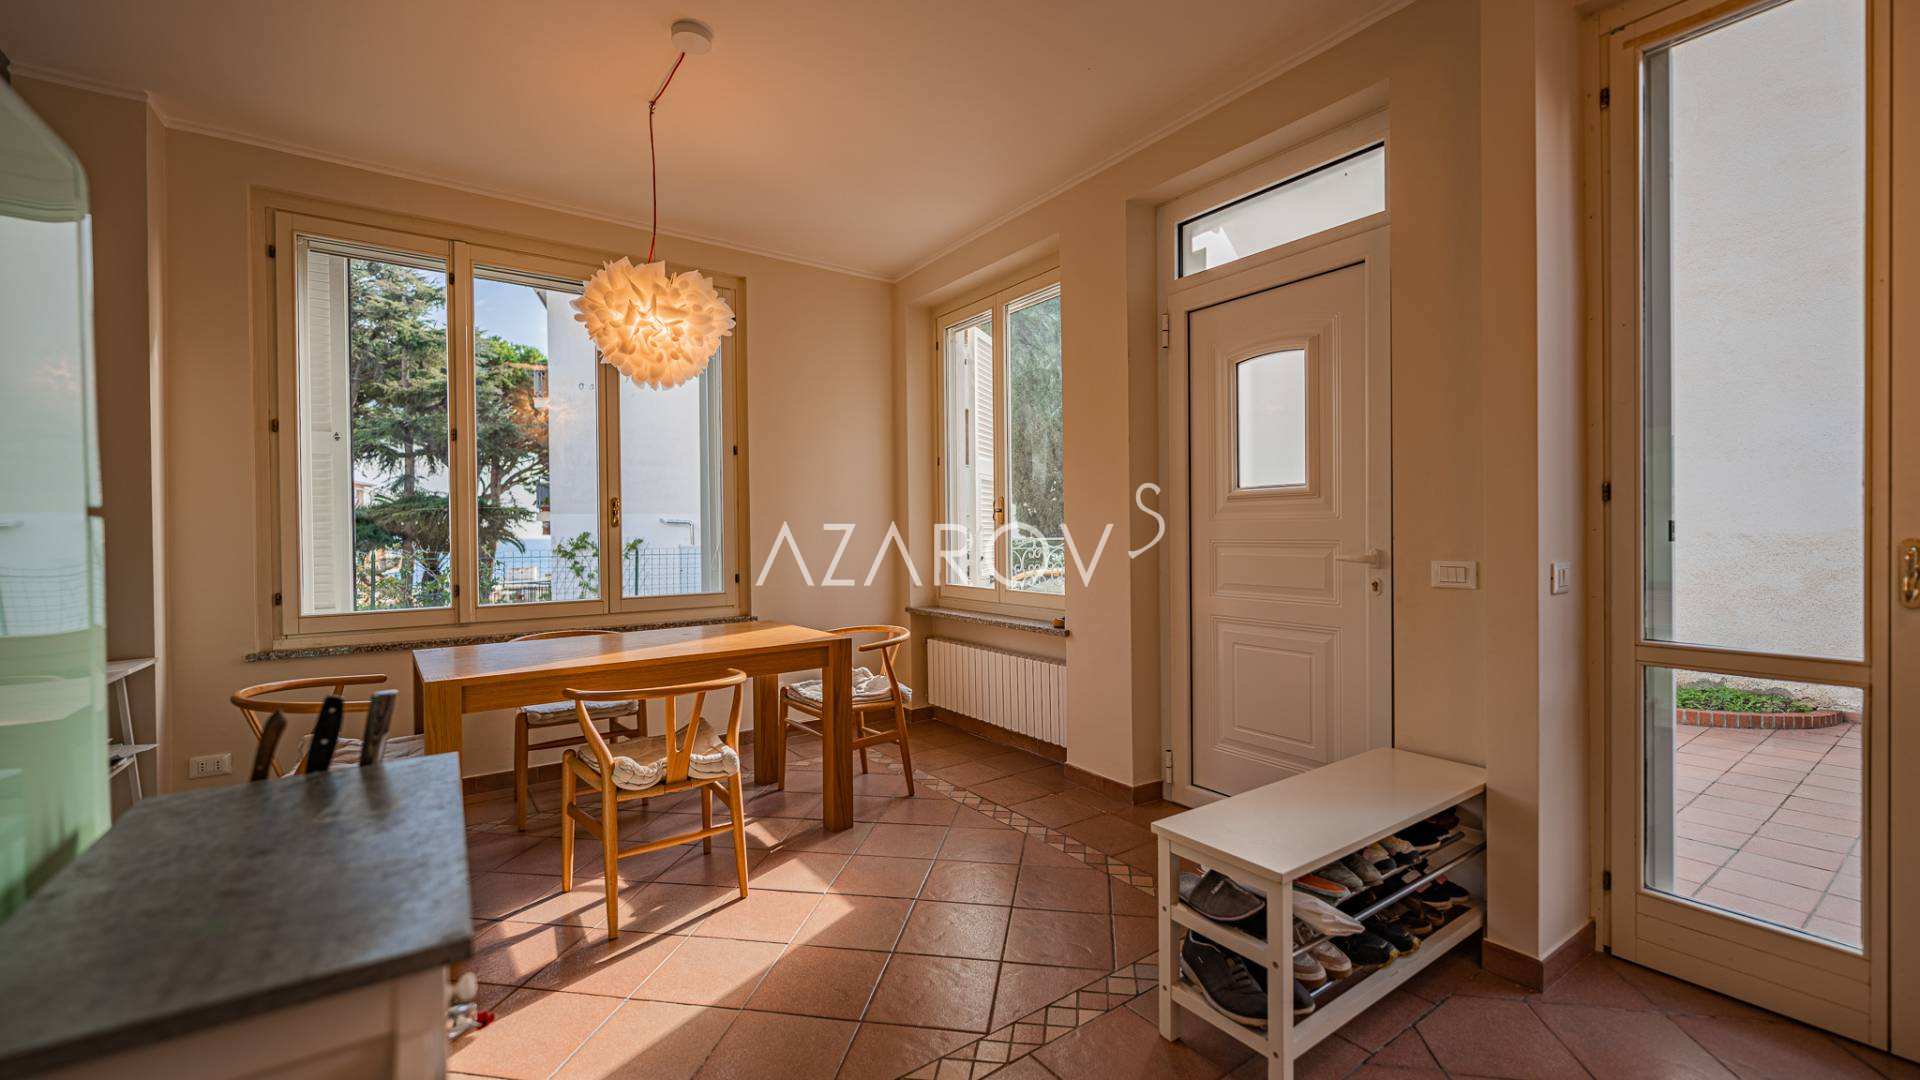 Long term house for rent in Sanremo